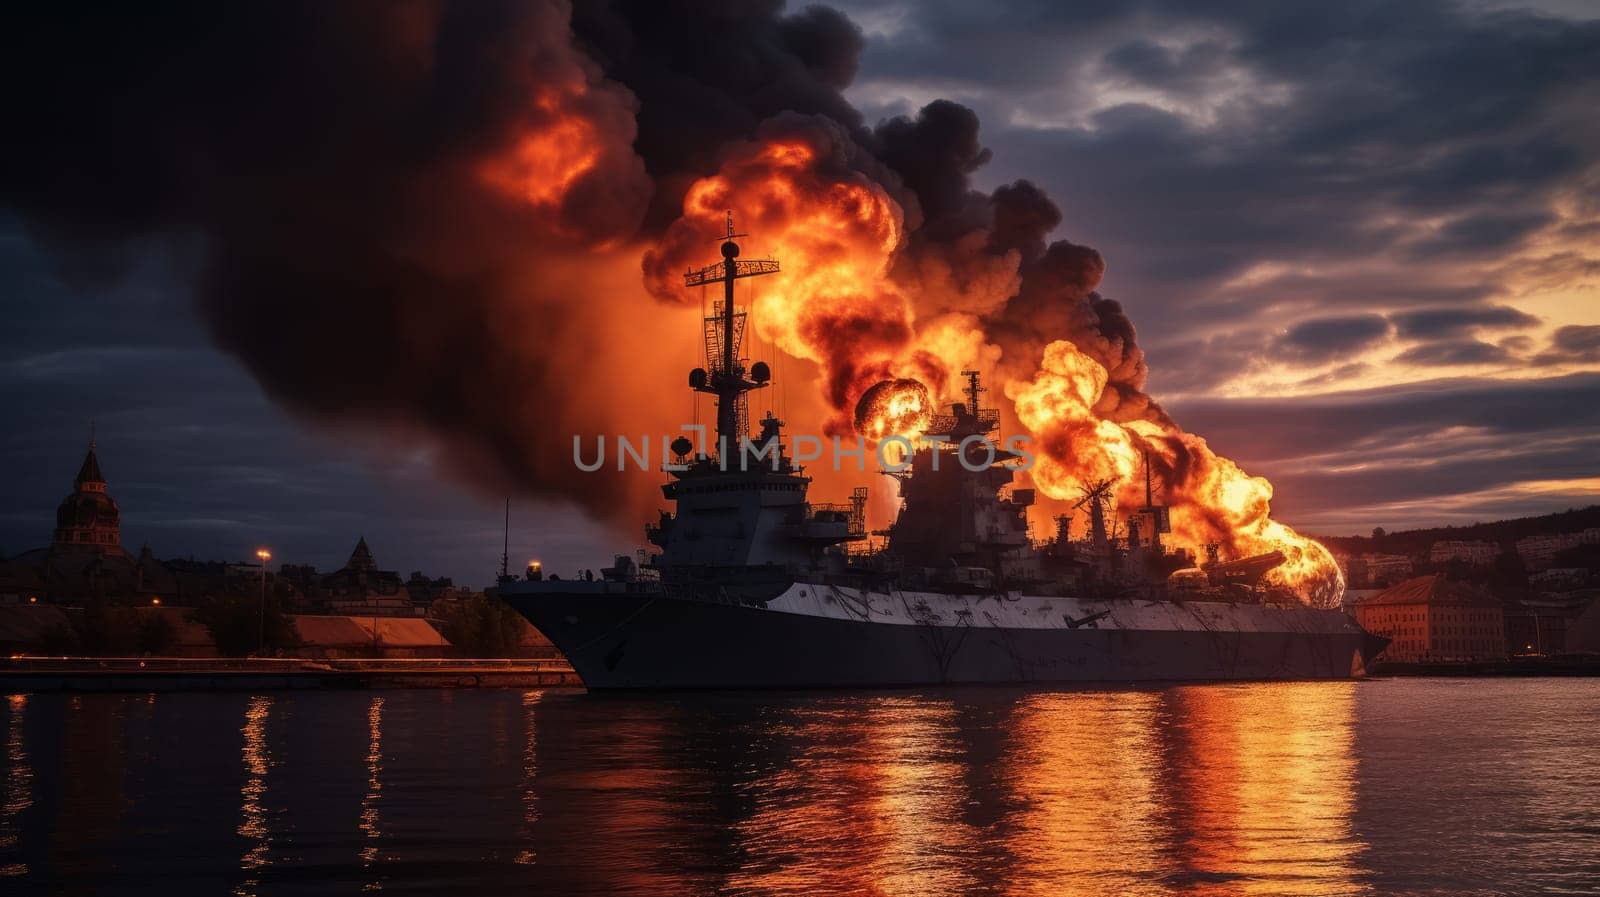 Burning naval vessel in the port. AI by but_photo